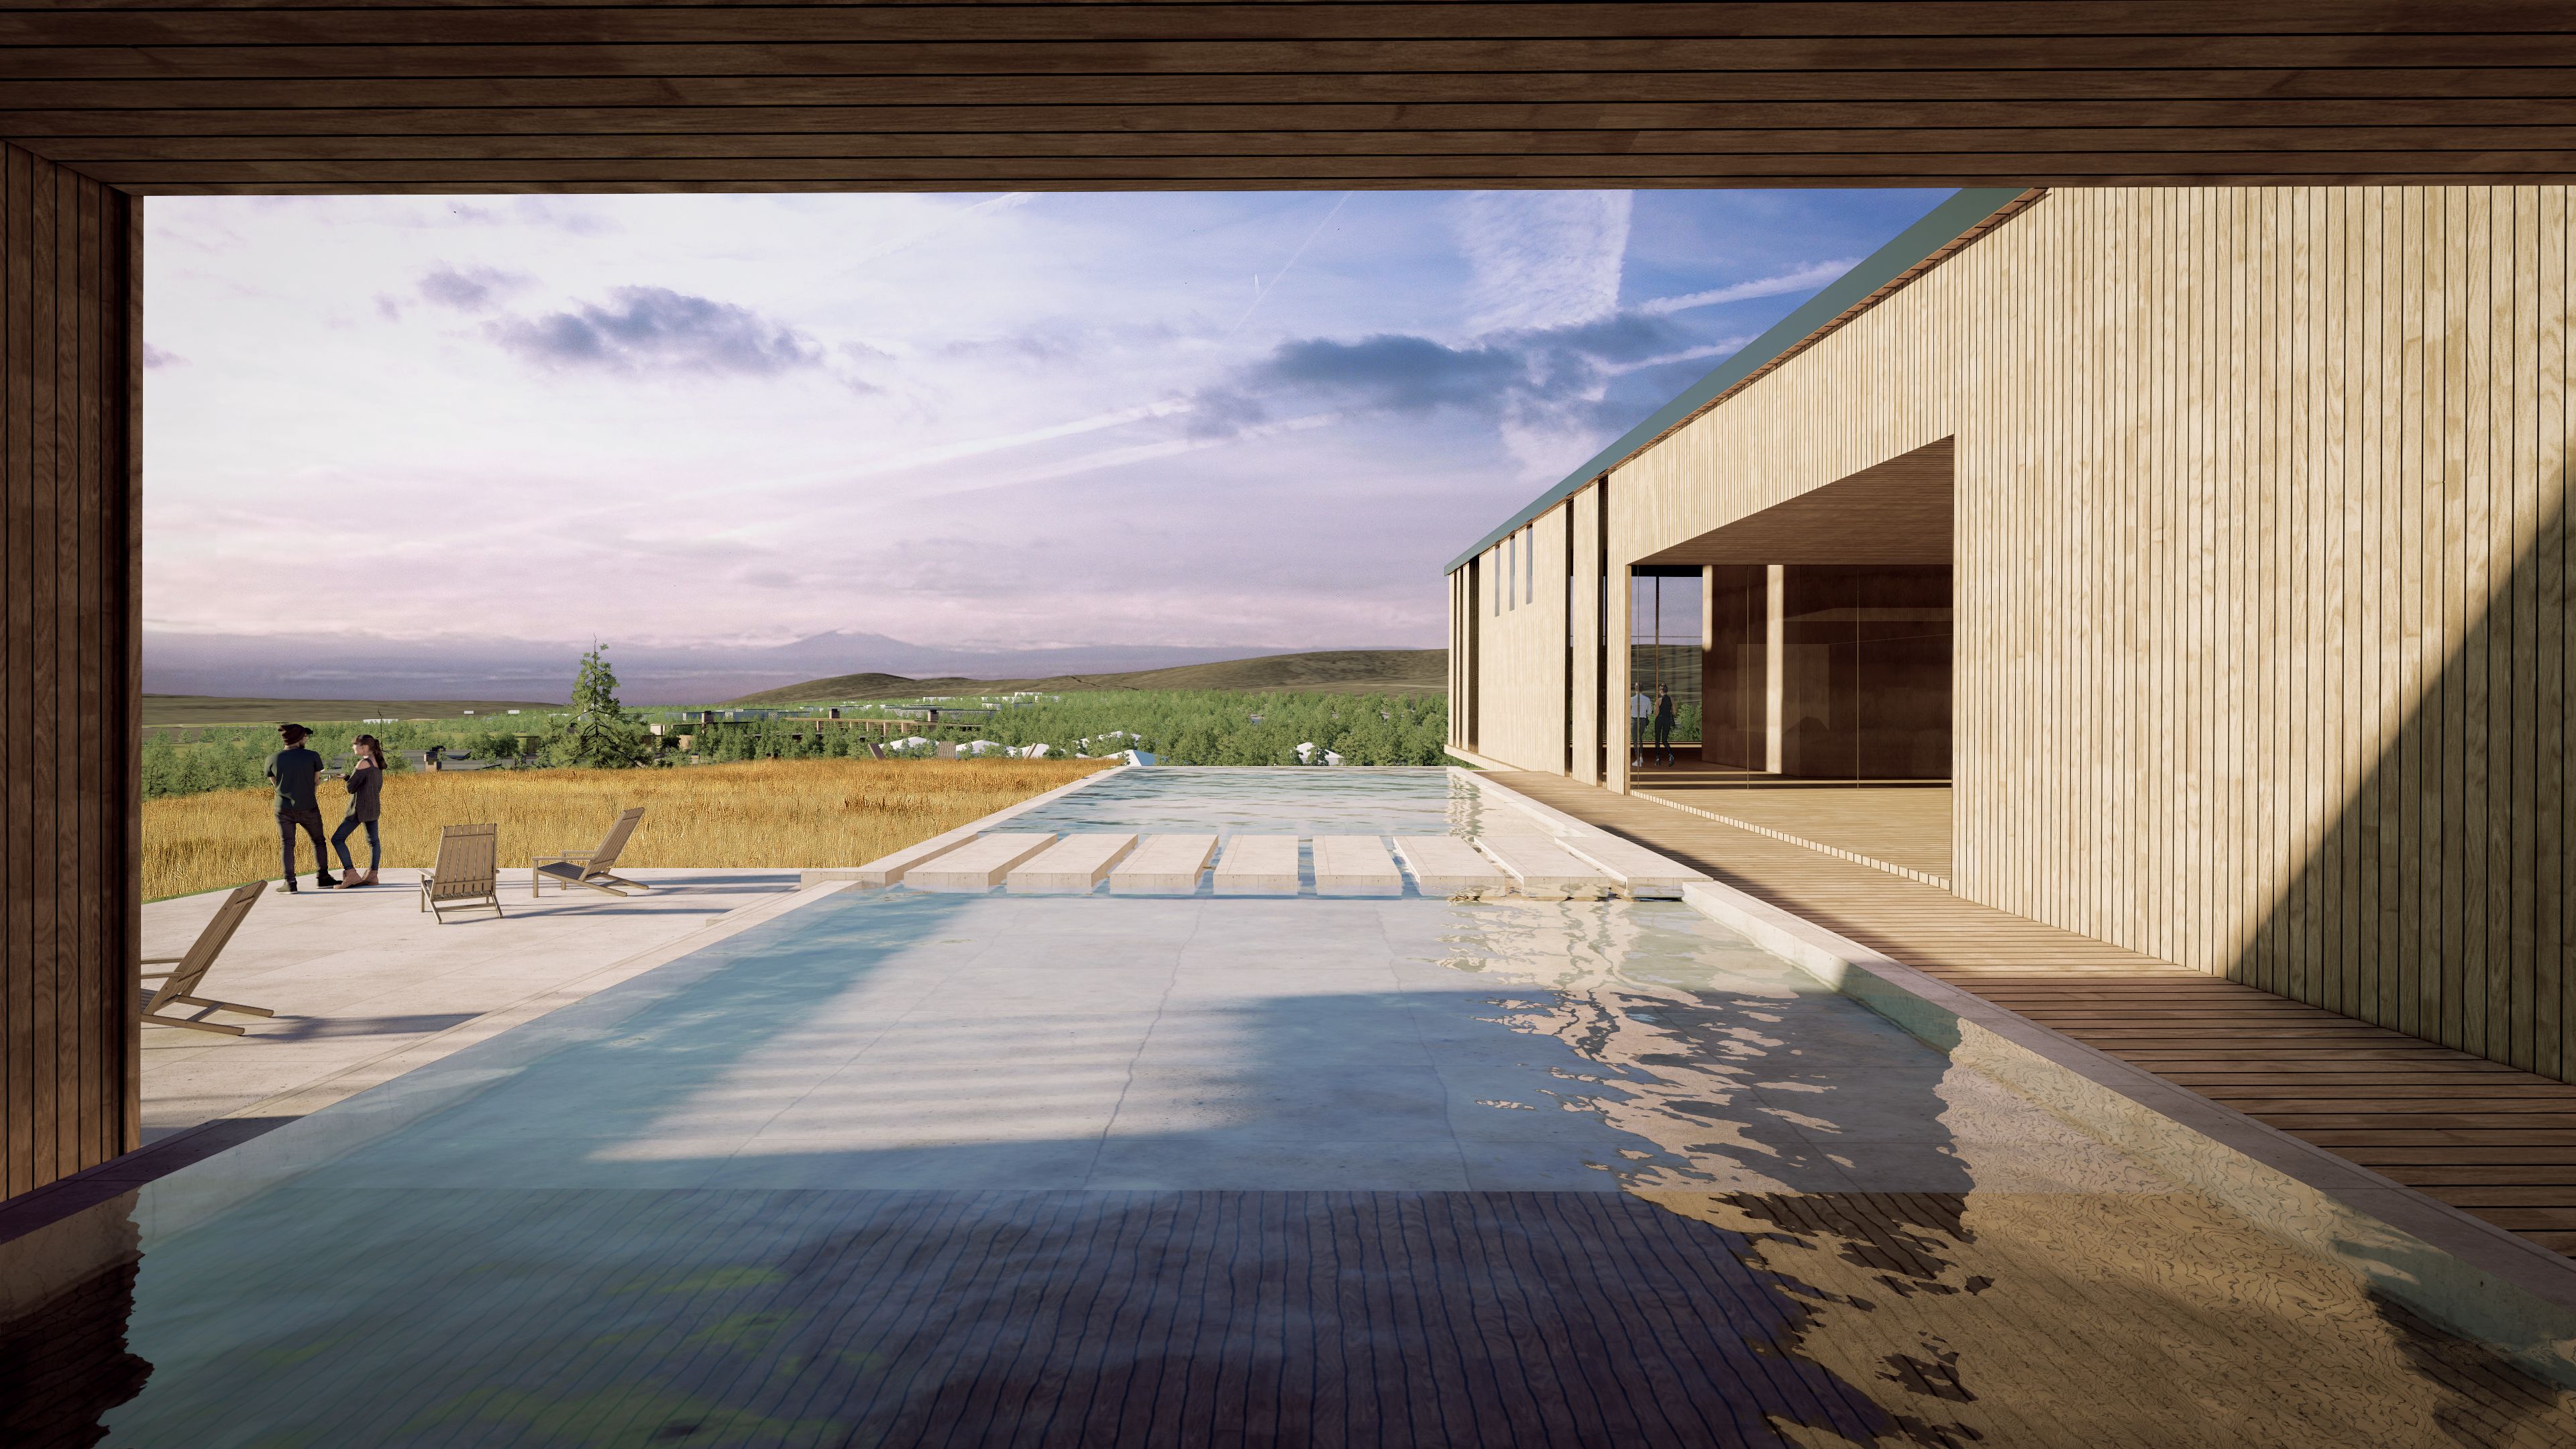 An artistic rendering of the pool at the in-development Thornburgh Ranch.